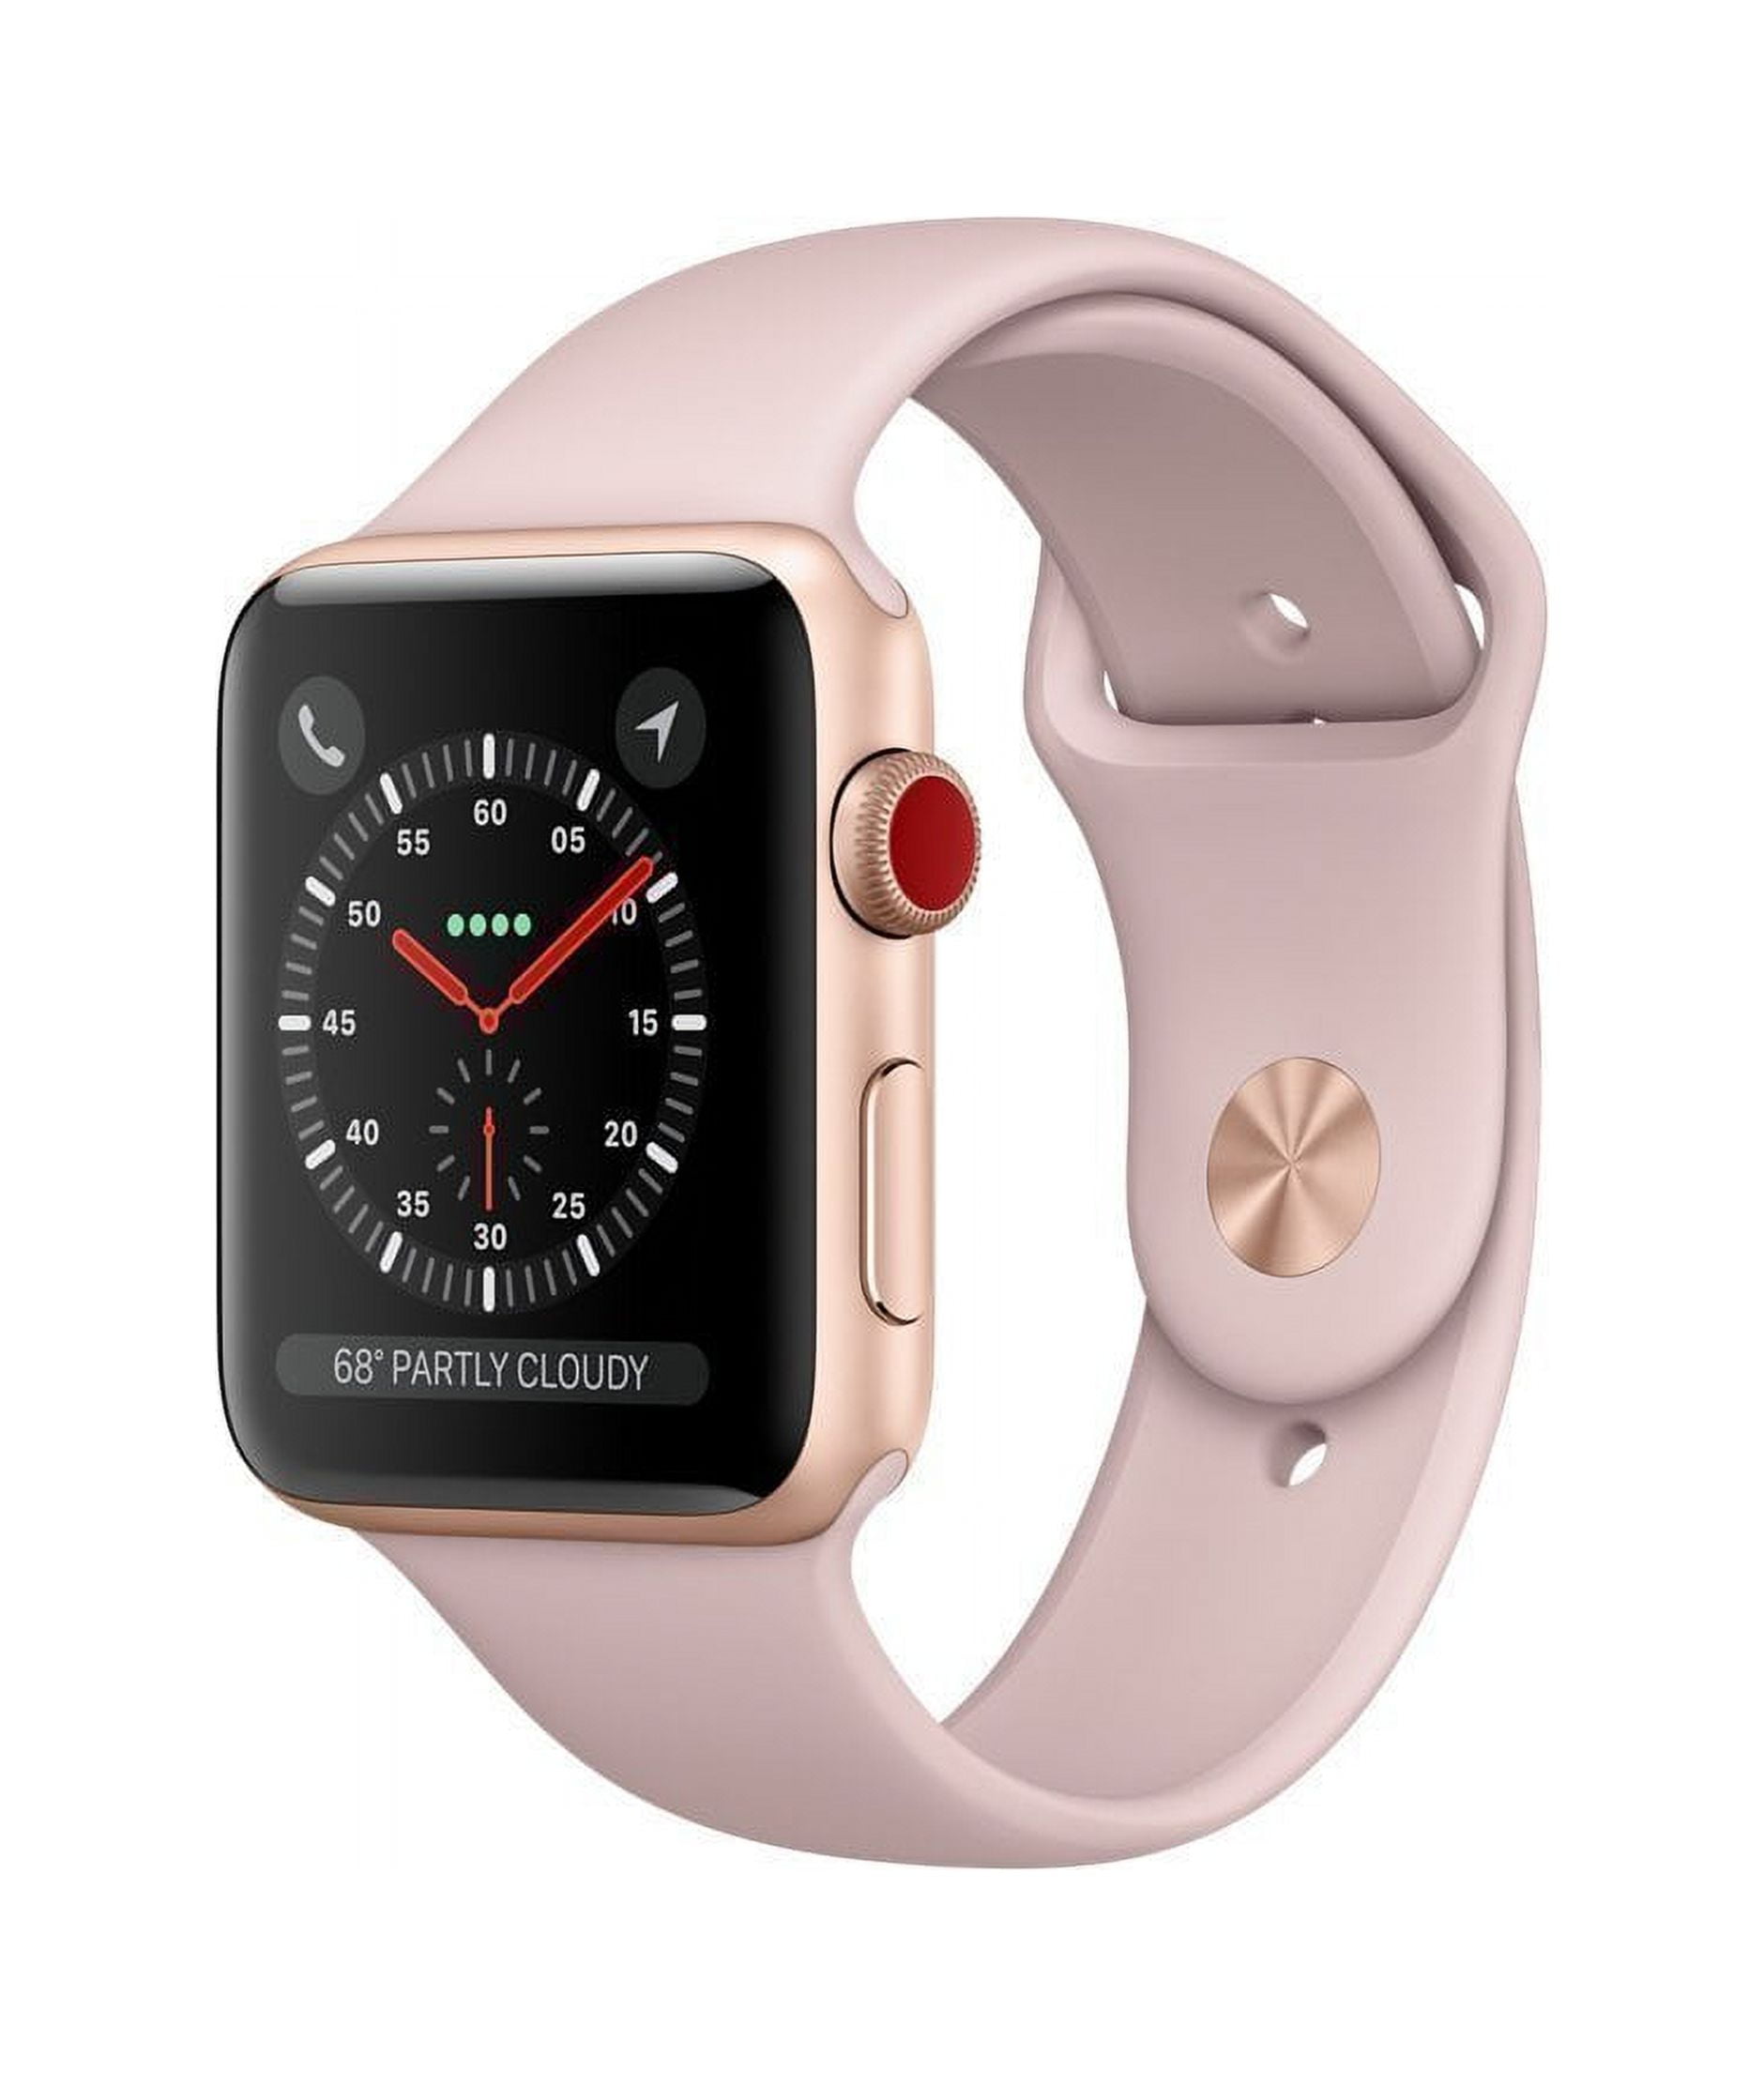 Apple Watch Series 3 42mm with Cellular - Wearables